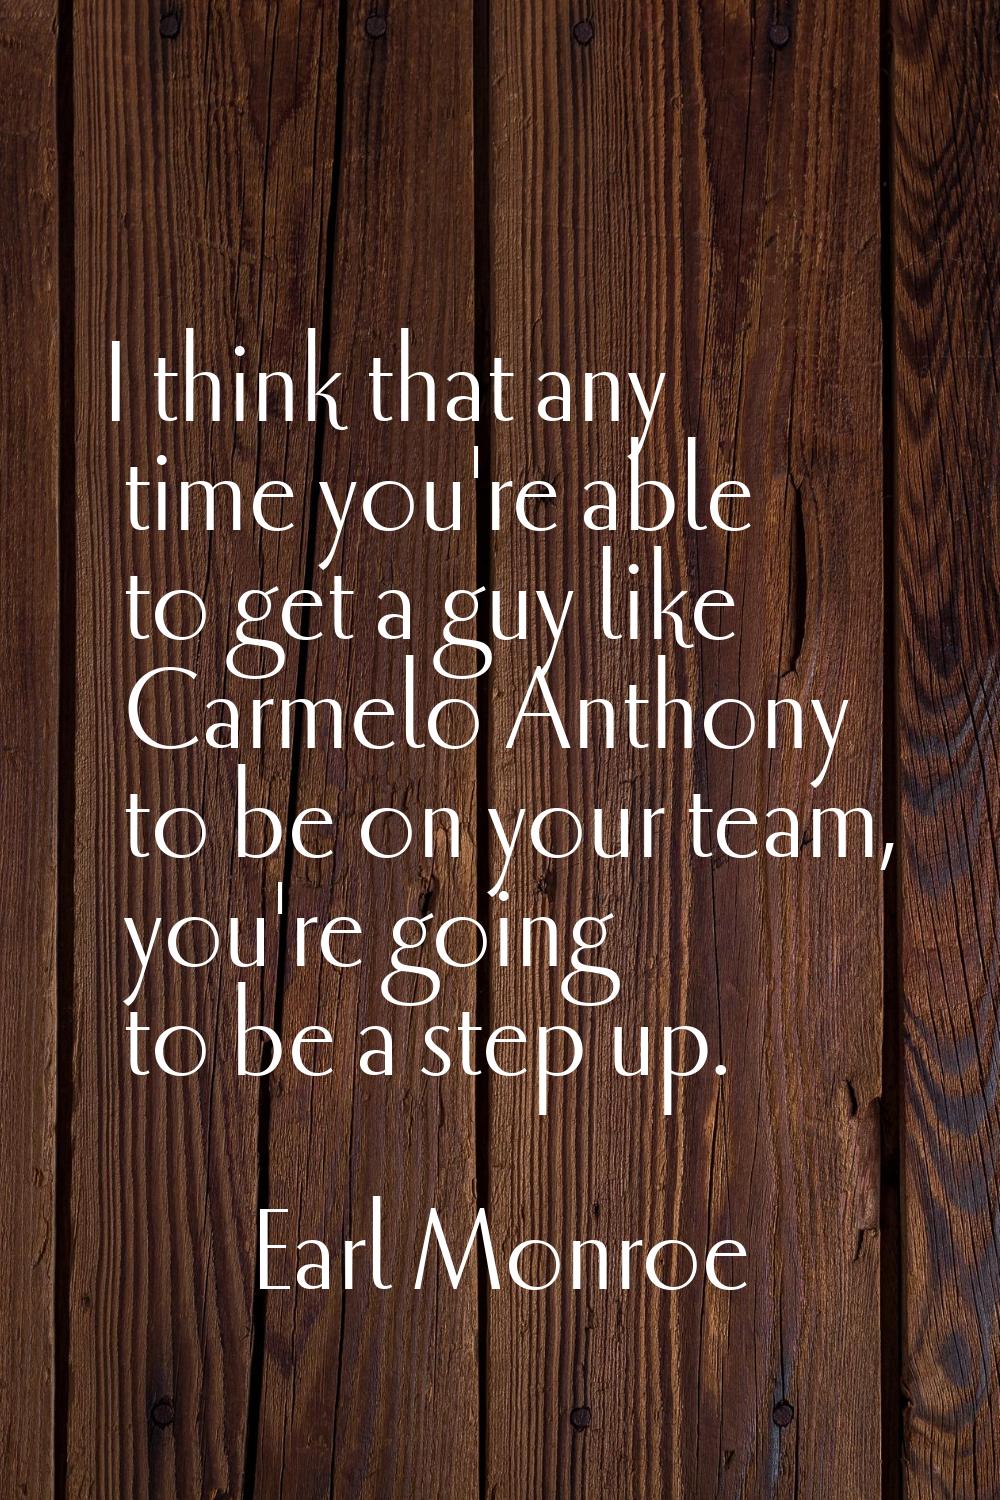 I think that any time you're able to get a guy like Carmelo Anthony to be on your team, you're goin